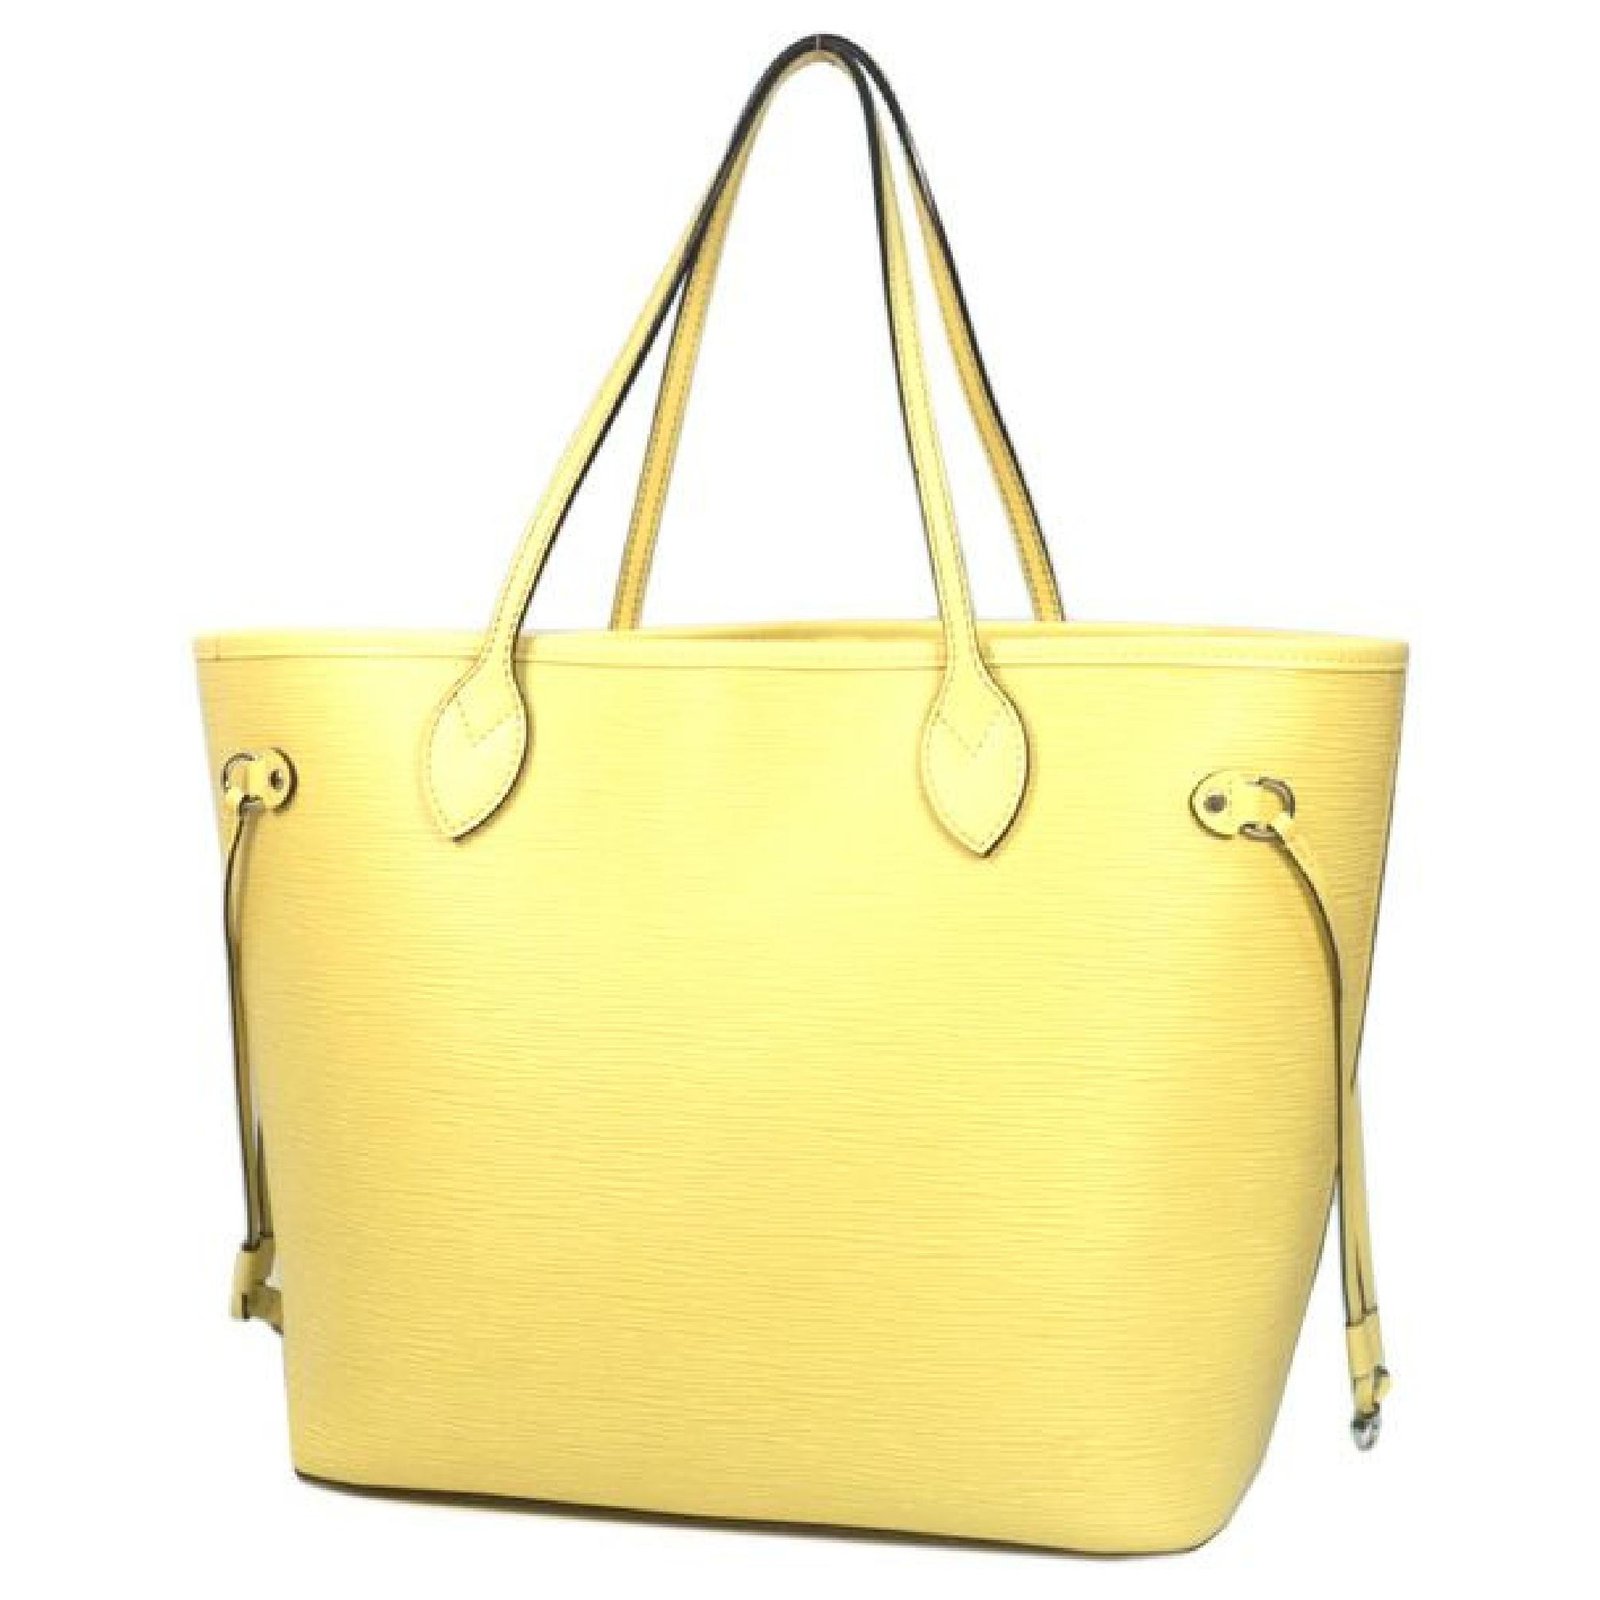 Louis Vuitton Yellow Epi Leather Neverfull MM Tote Bag